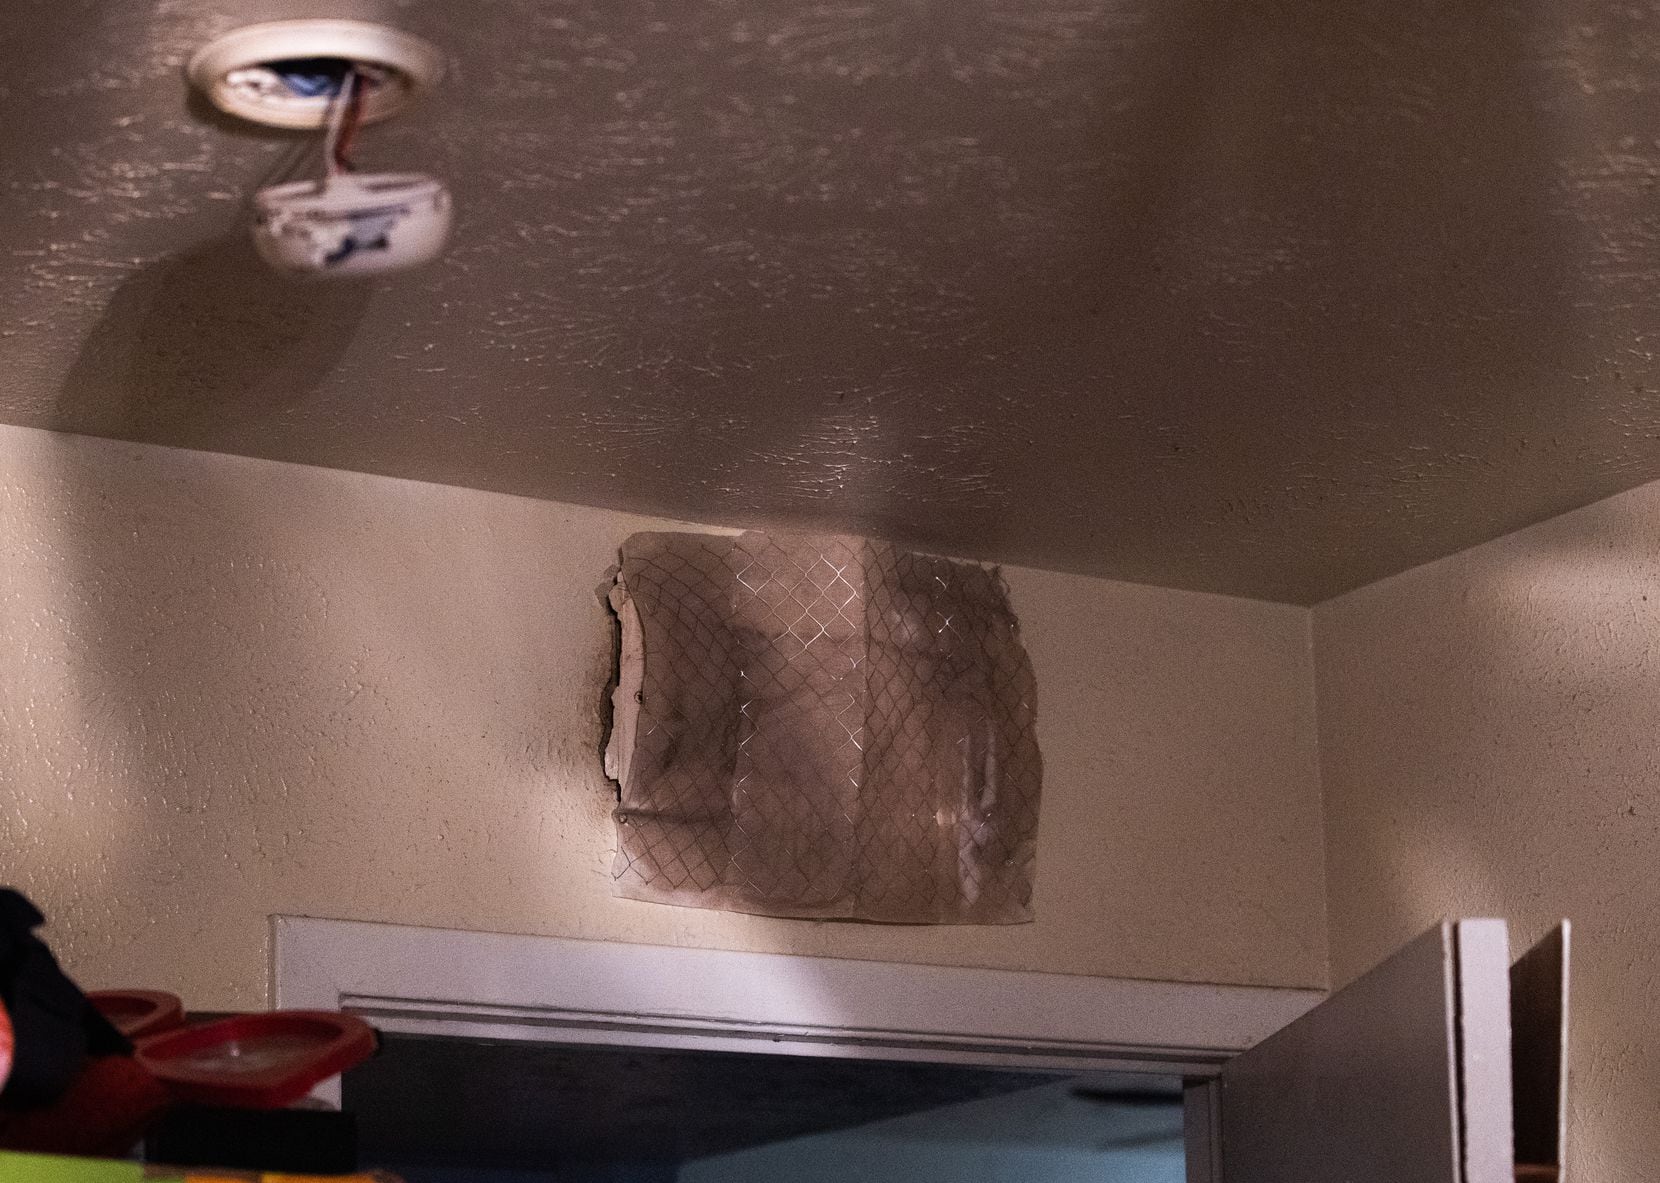 A homemade filter has been placed over an air vent that is covered in mold inside Theresa...